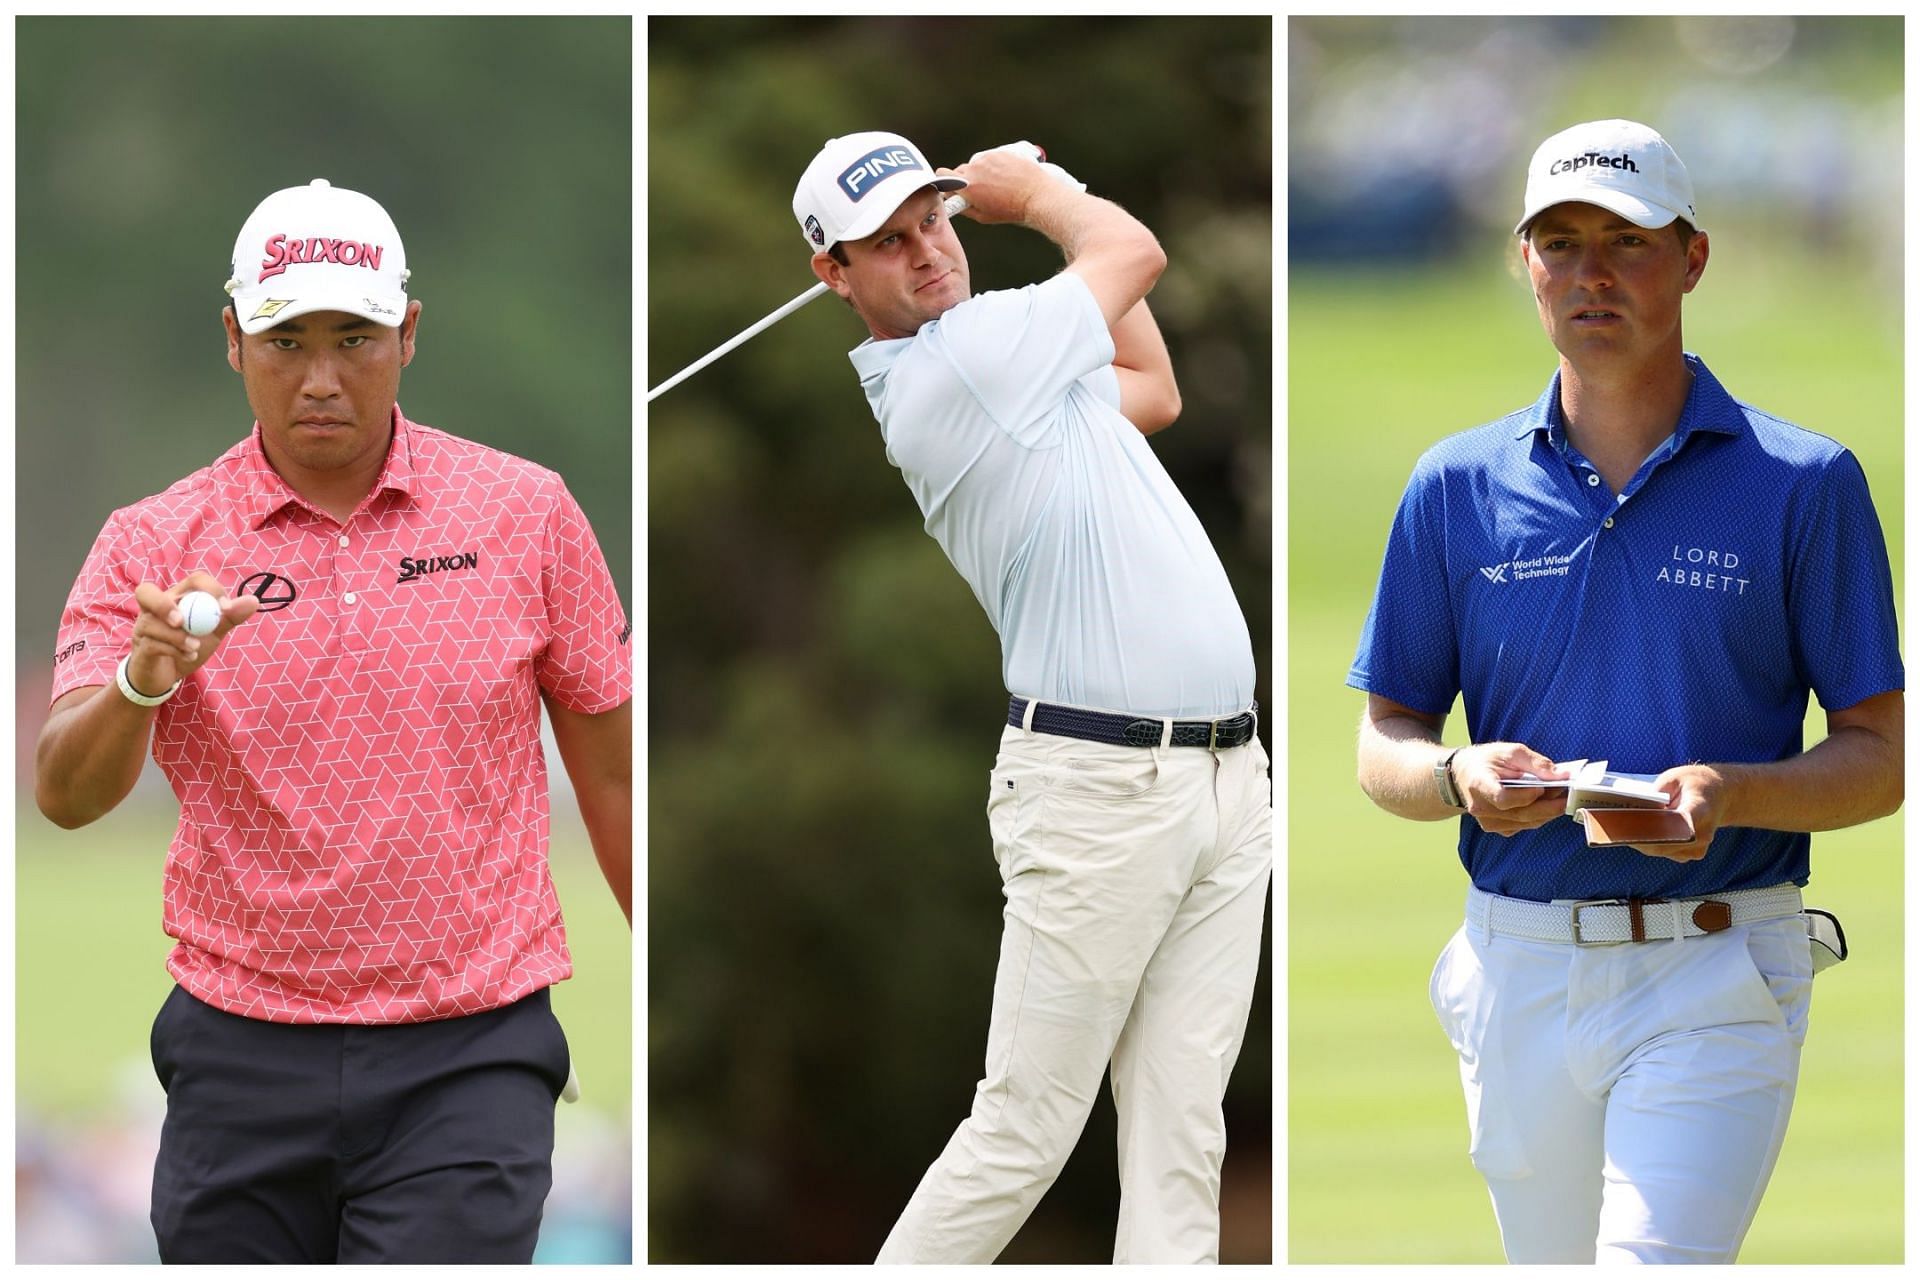 Several prominent players are on the verge of not making it to the BMW Championship